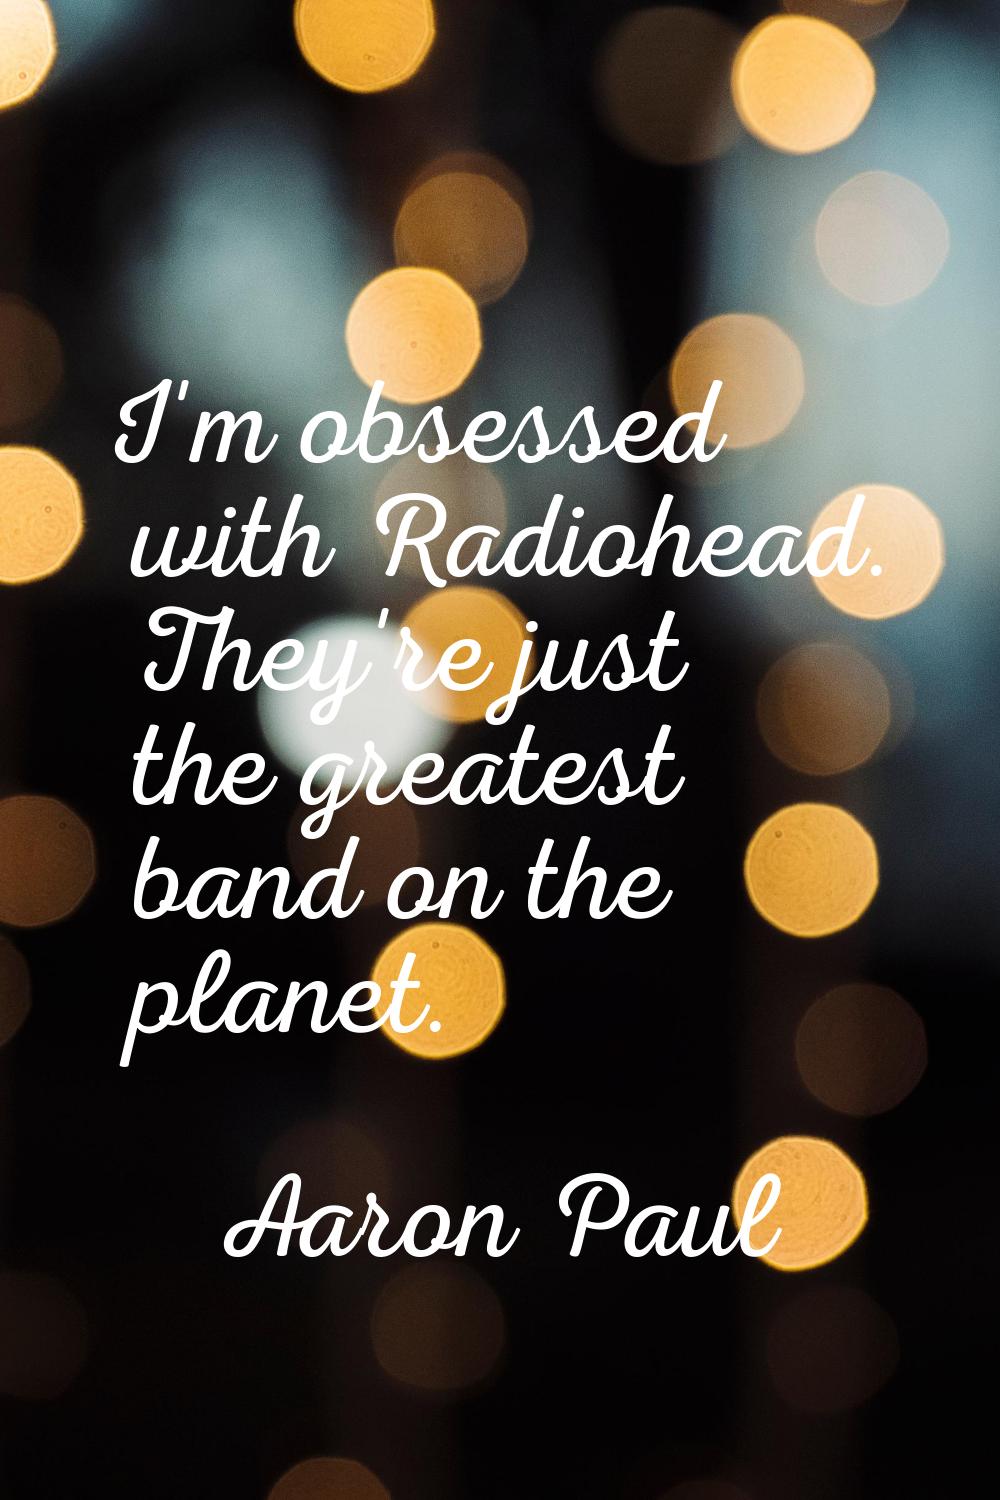 I'm obsessed with Radiohead. They're just the greatest band on the planet.